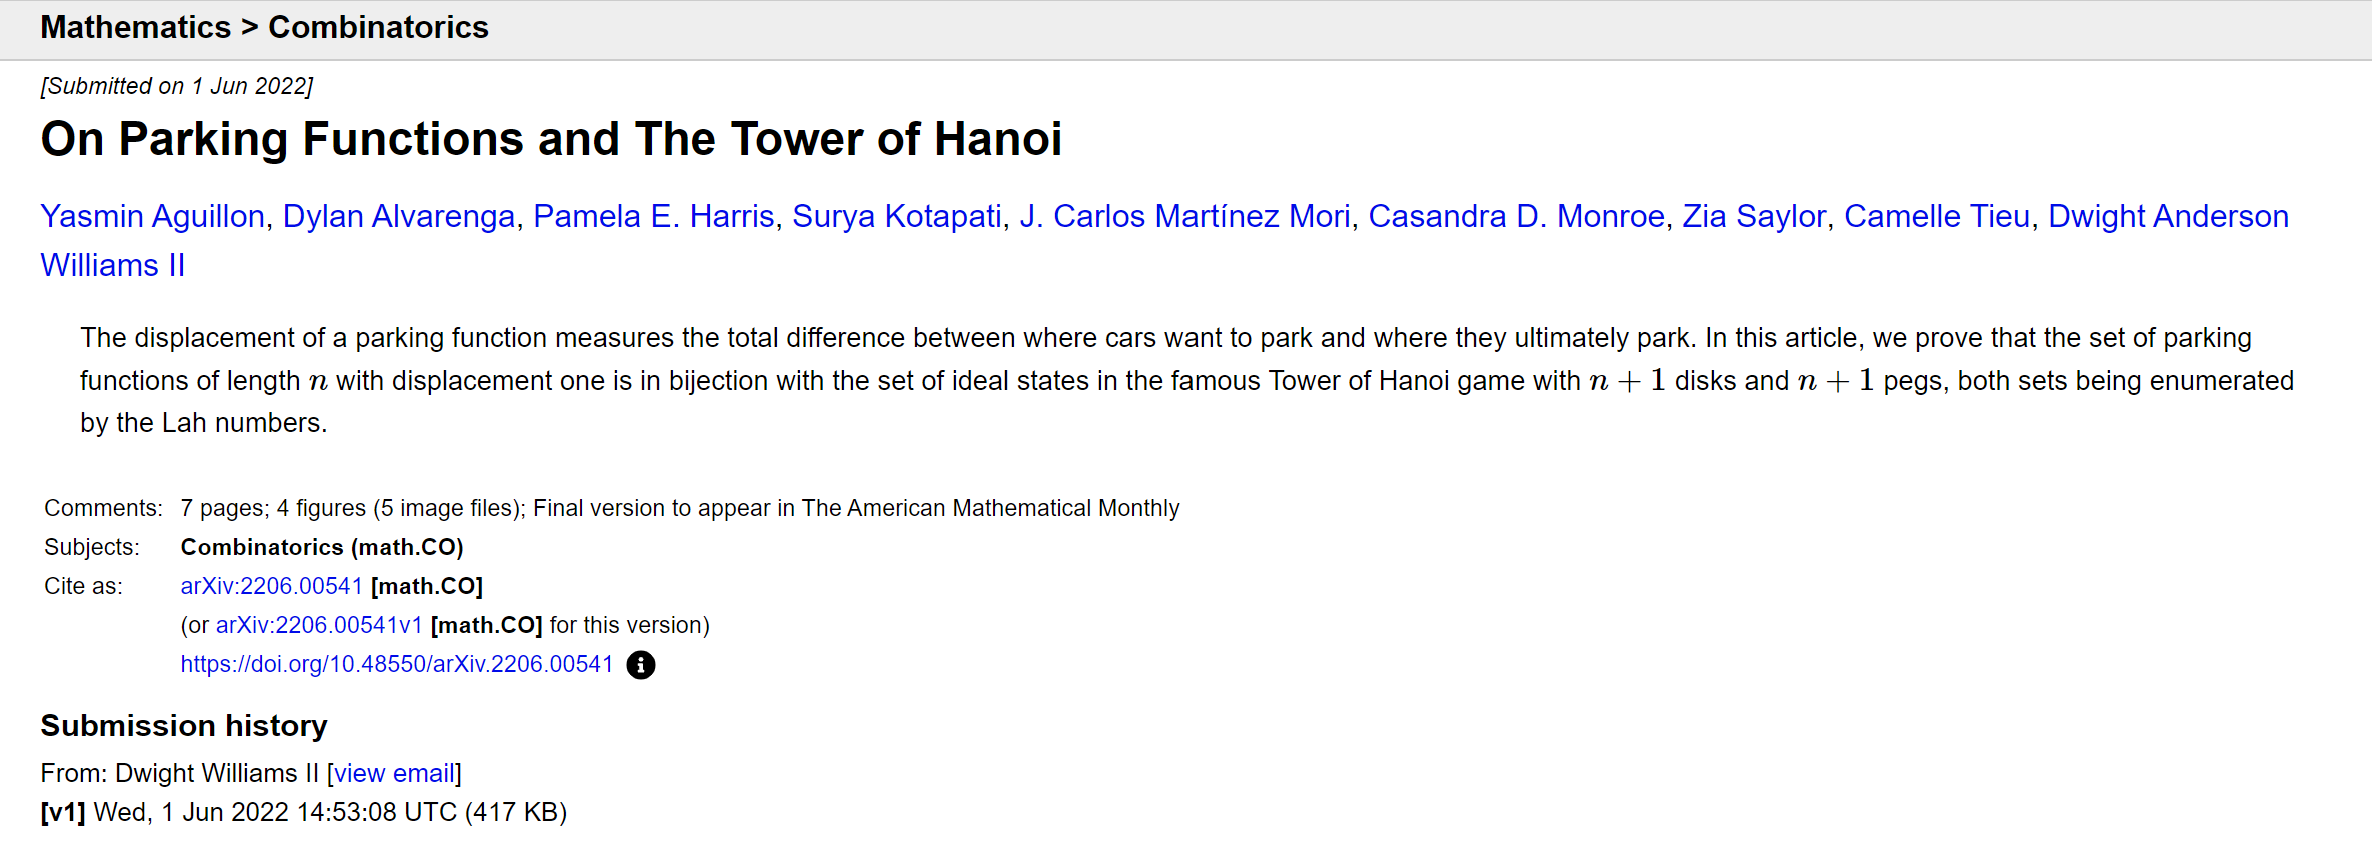 Preprint 2022#2 (#3): On Parking Functions and The Tower of Hanoi